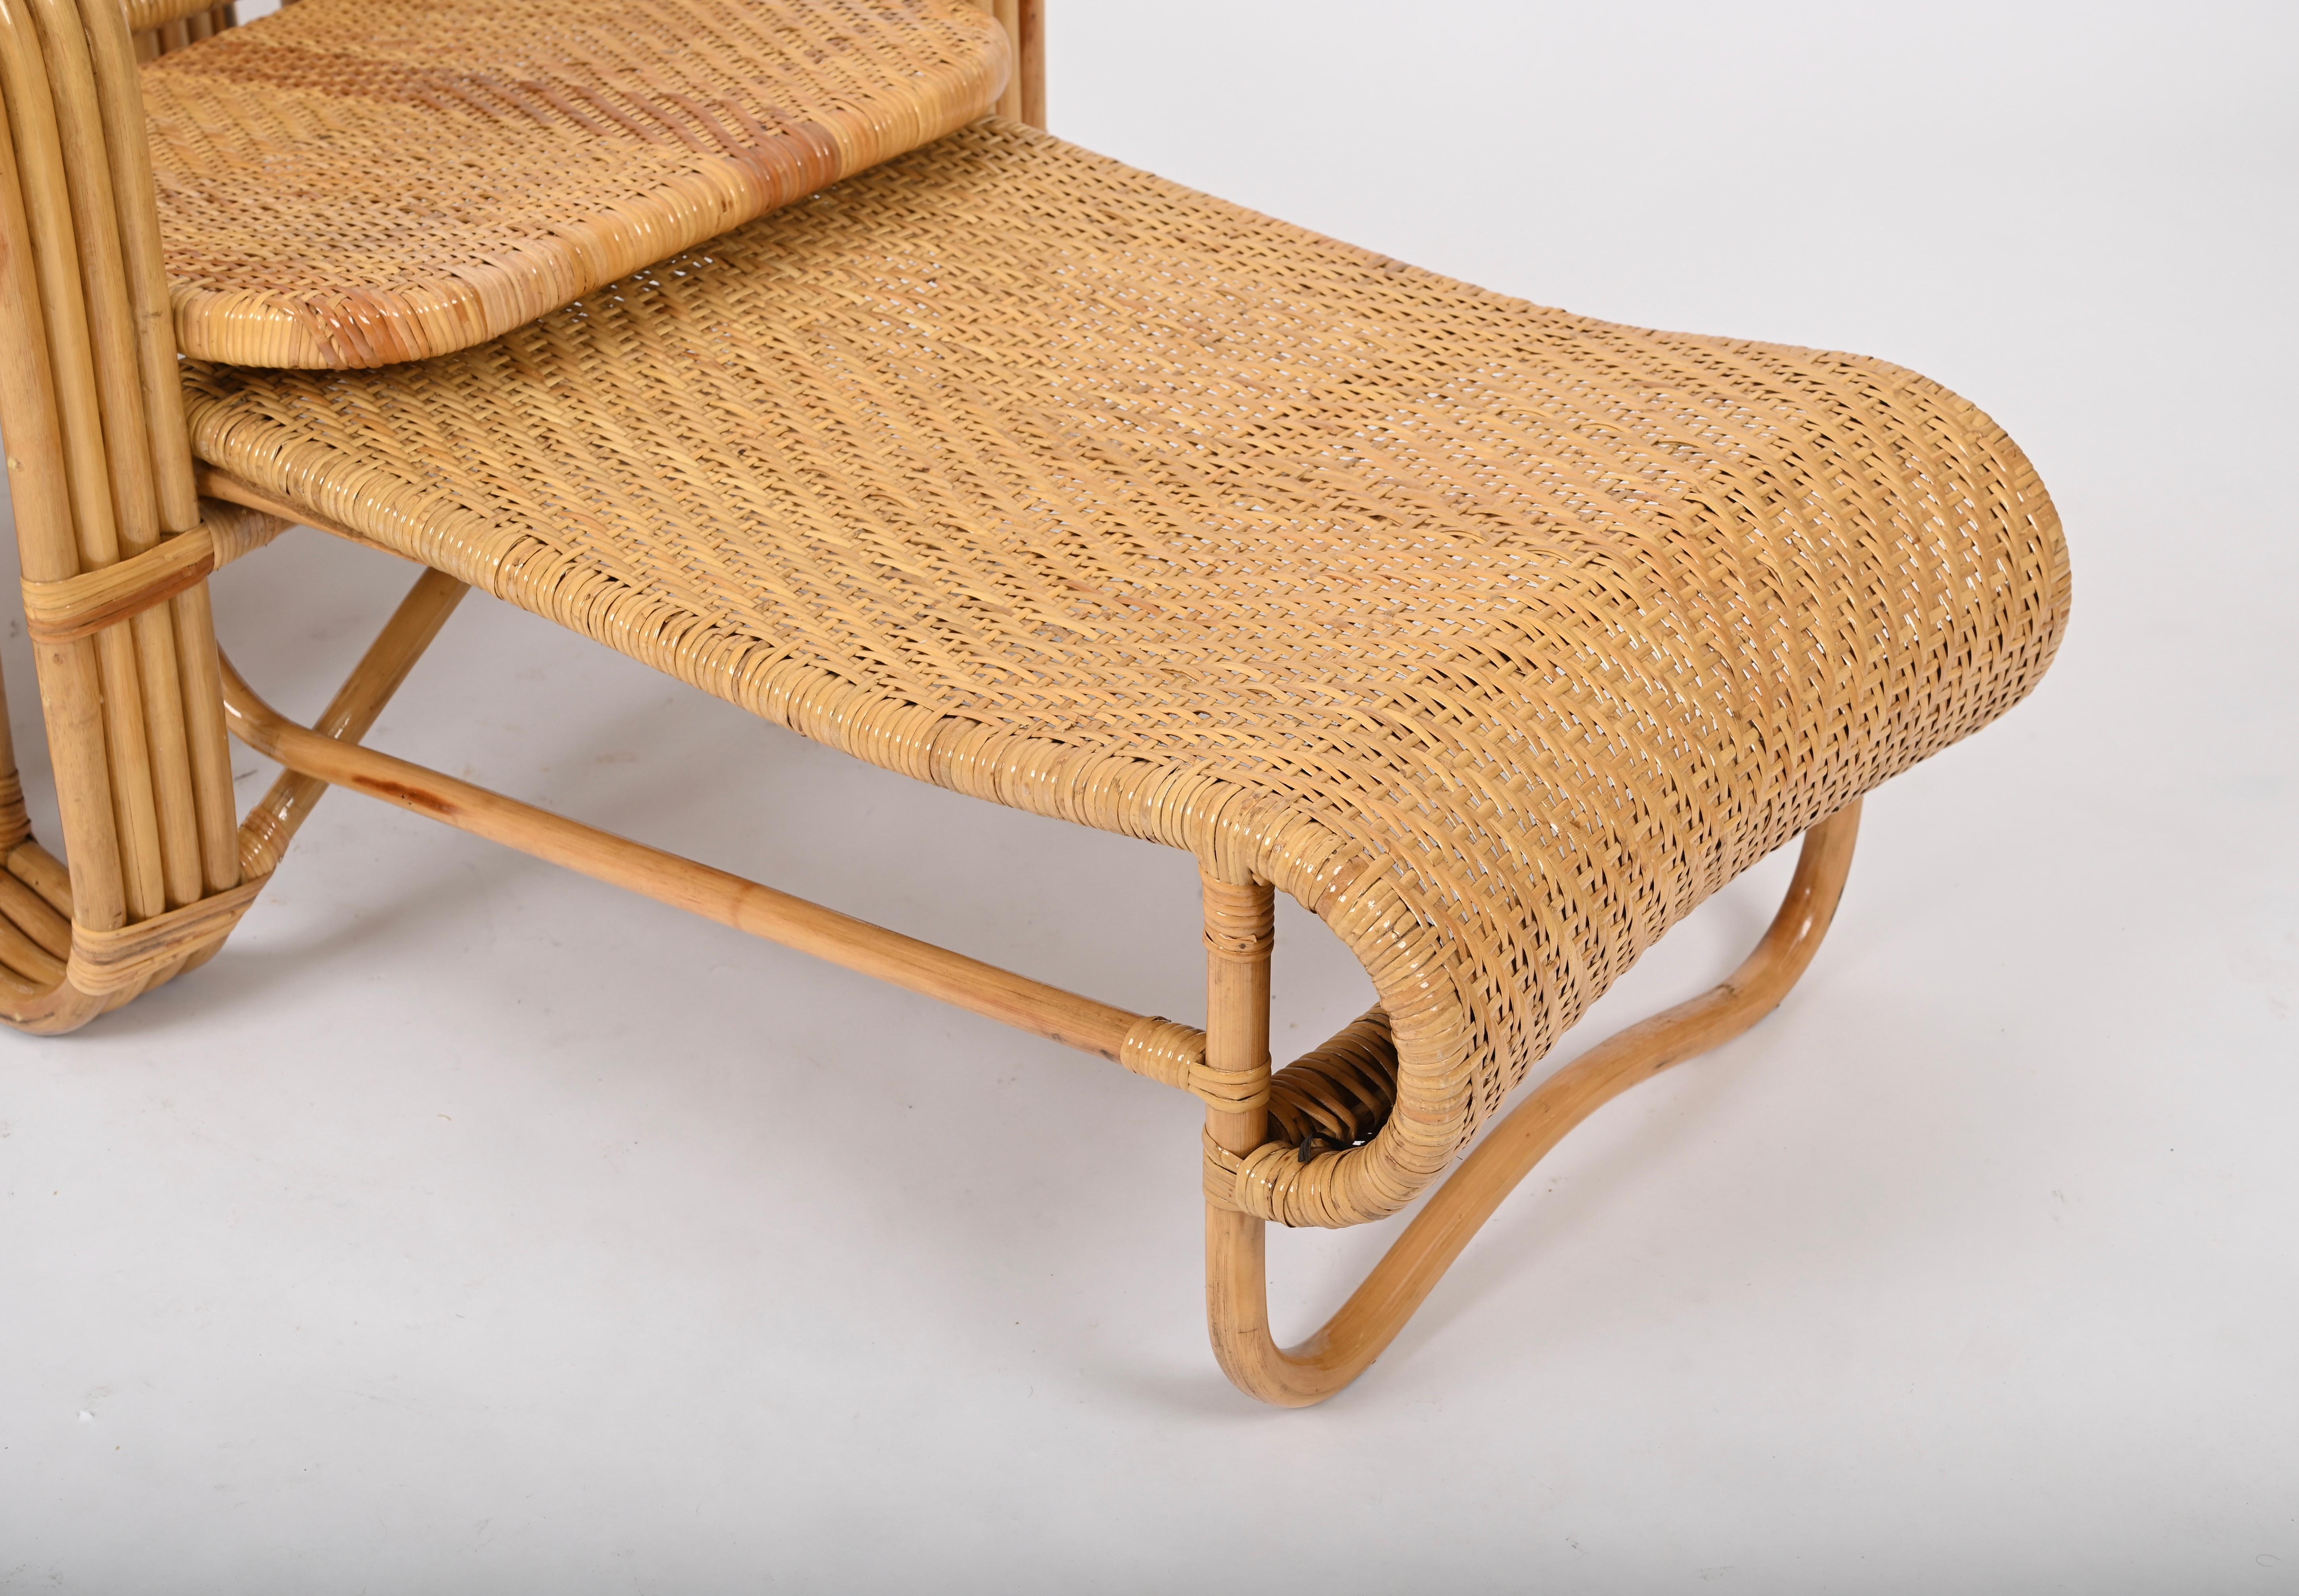 Pair of Adjustable Chaise Longue / Lounge Chairs, Wicker and Rattan, Italy '70s  For Sale 2